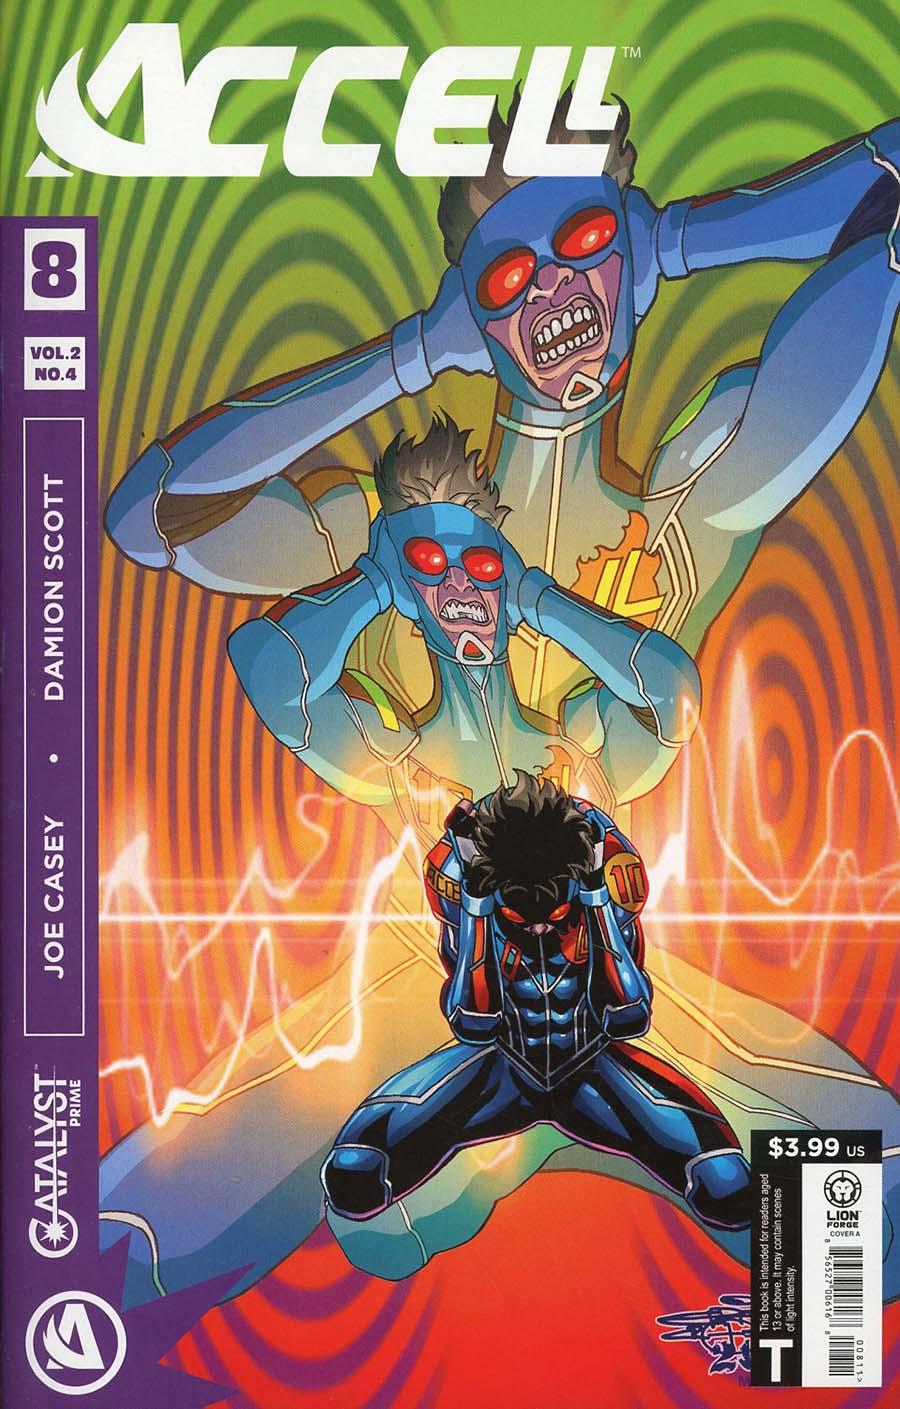 Catalyst Prime Accell Vol. 1 #8